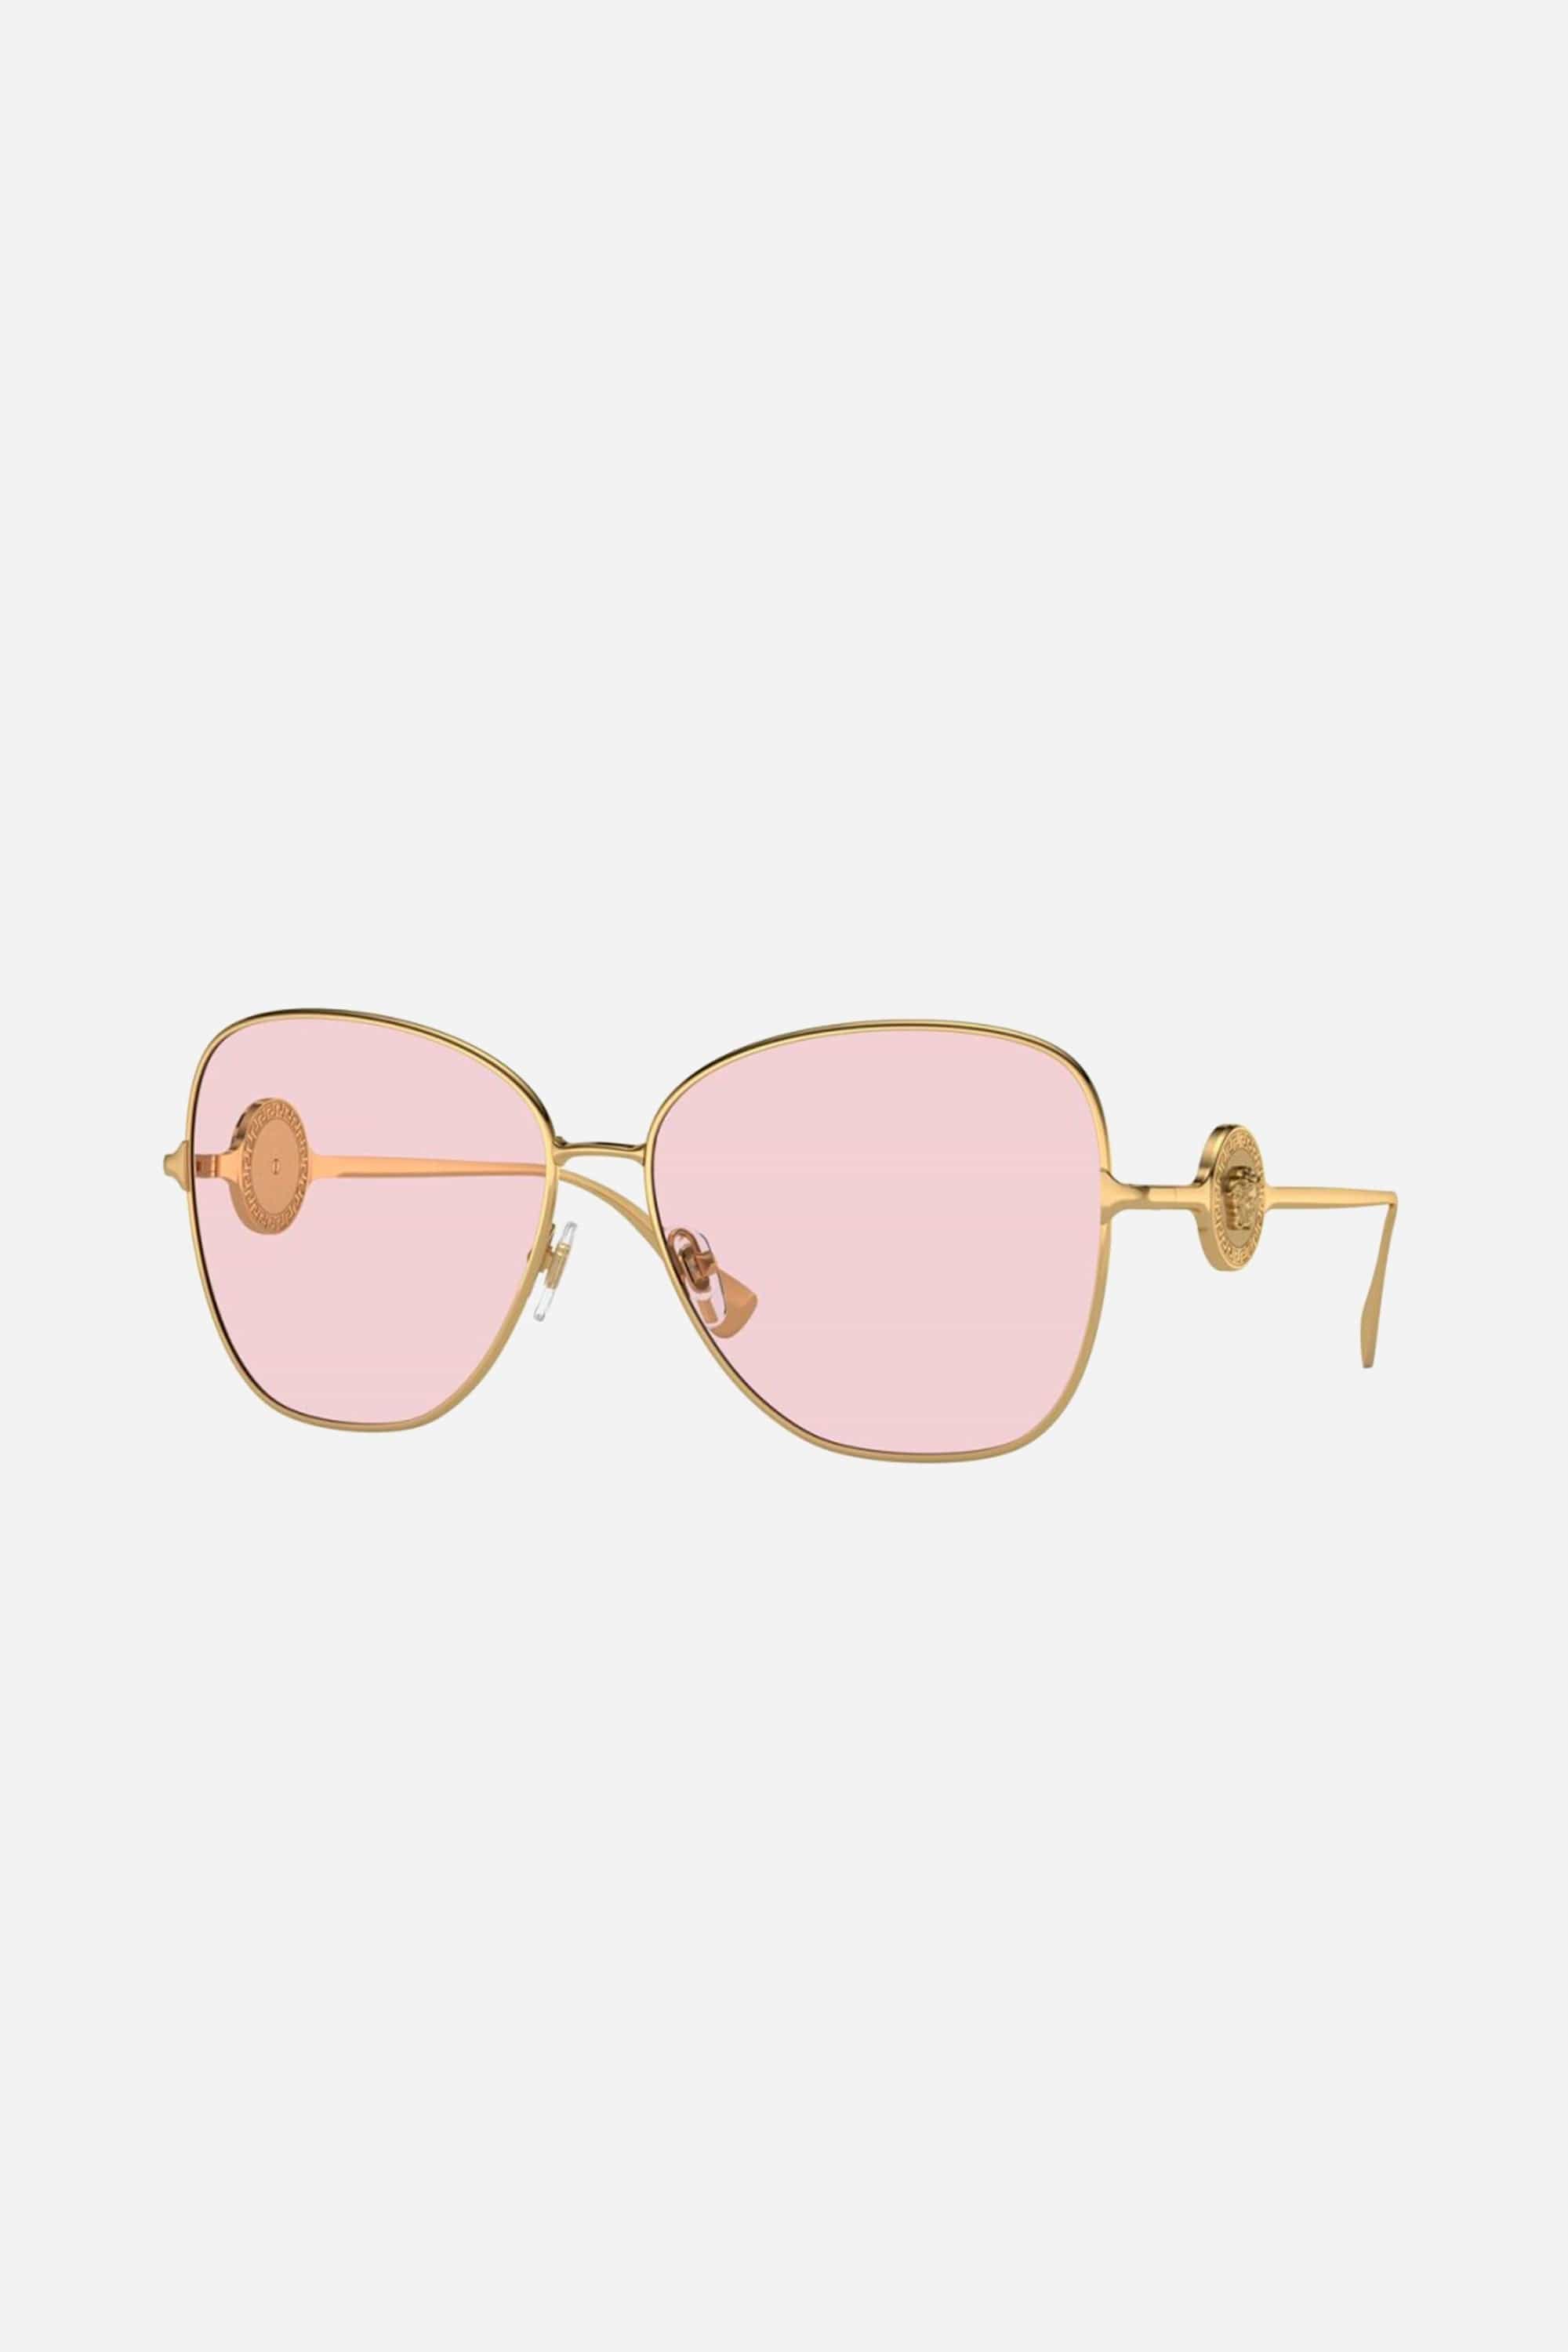 Versace gold butterfly sunglasses with orange lenses - Eyewear Club